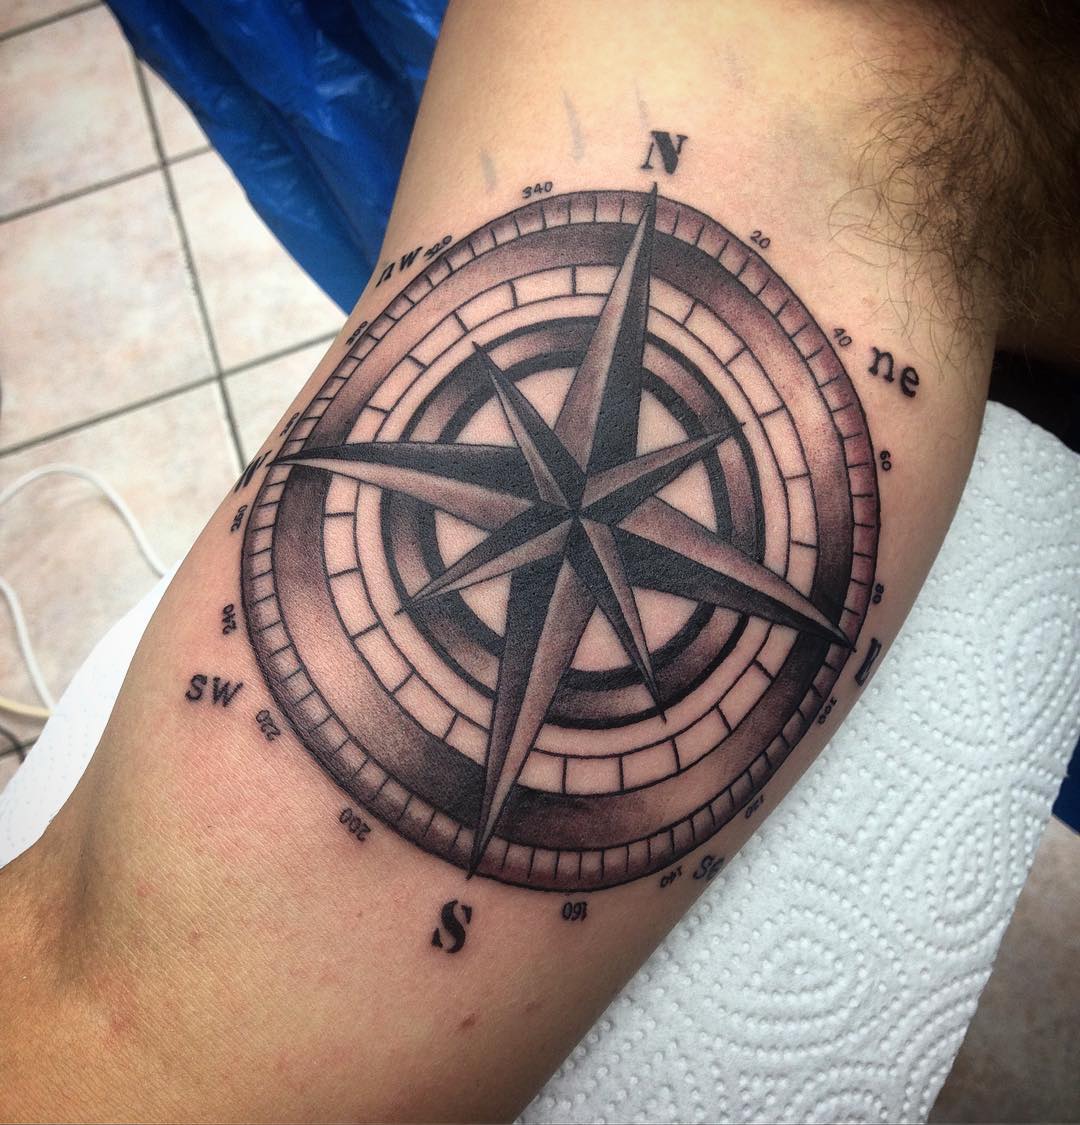 Nautical tattoos are way more fun if your client actually IS a sailor himself an...